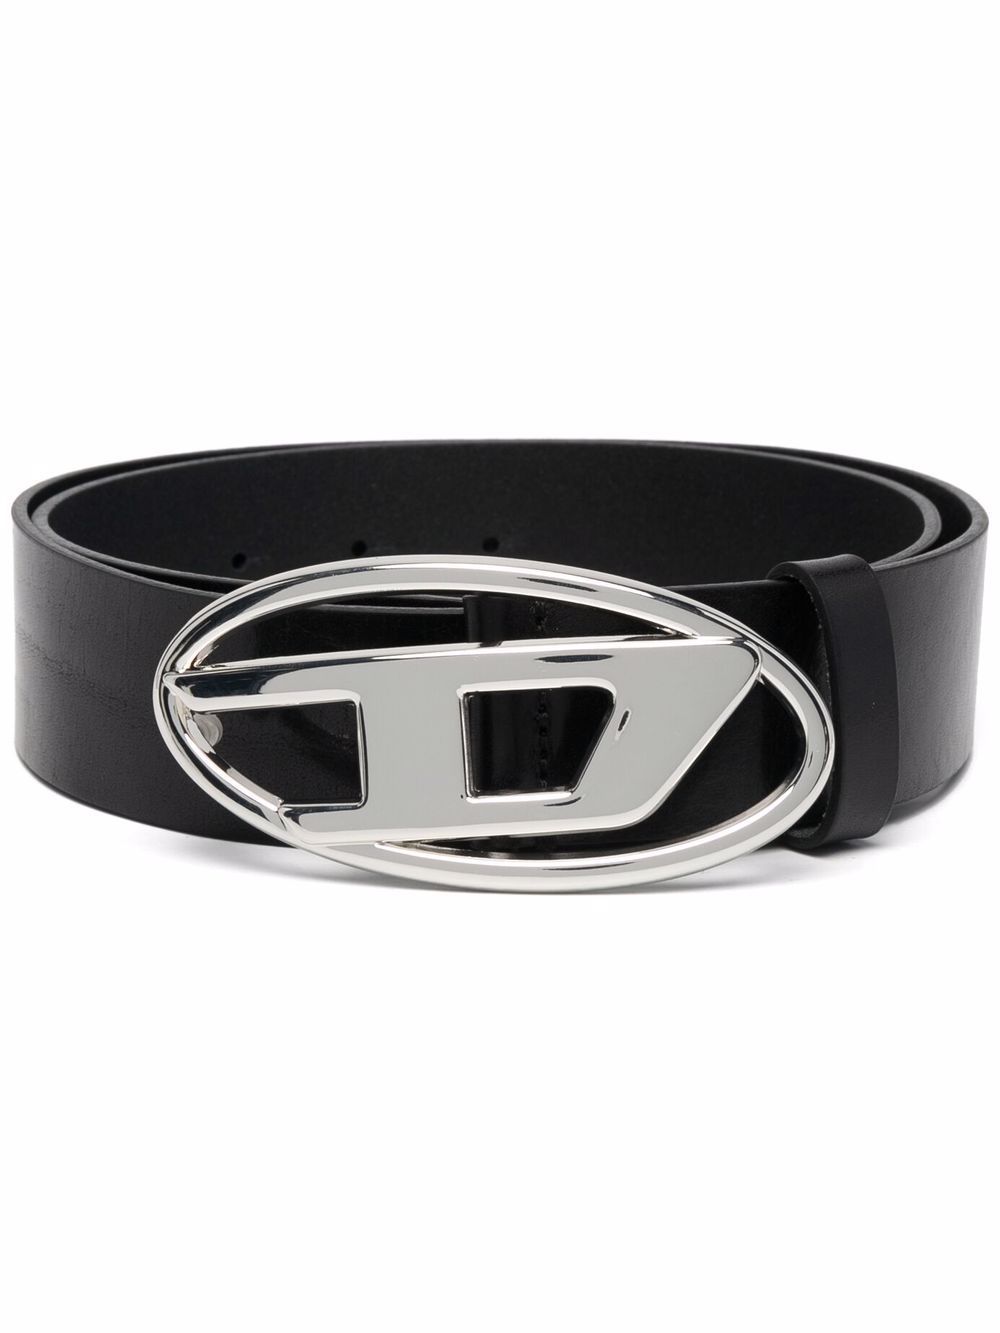 Buckle Up: Elevate Your Look with Stylish Belt Buckles